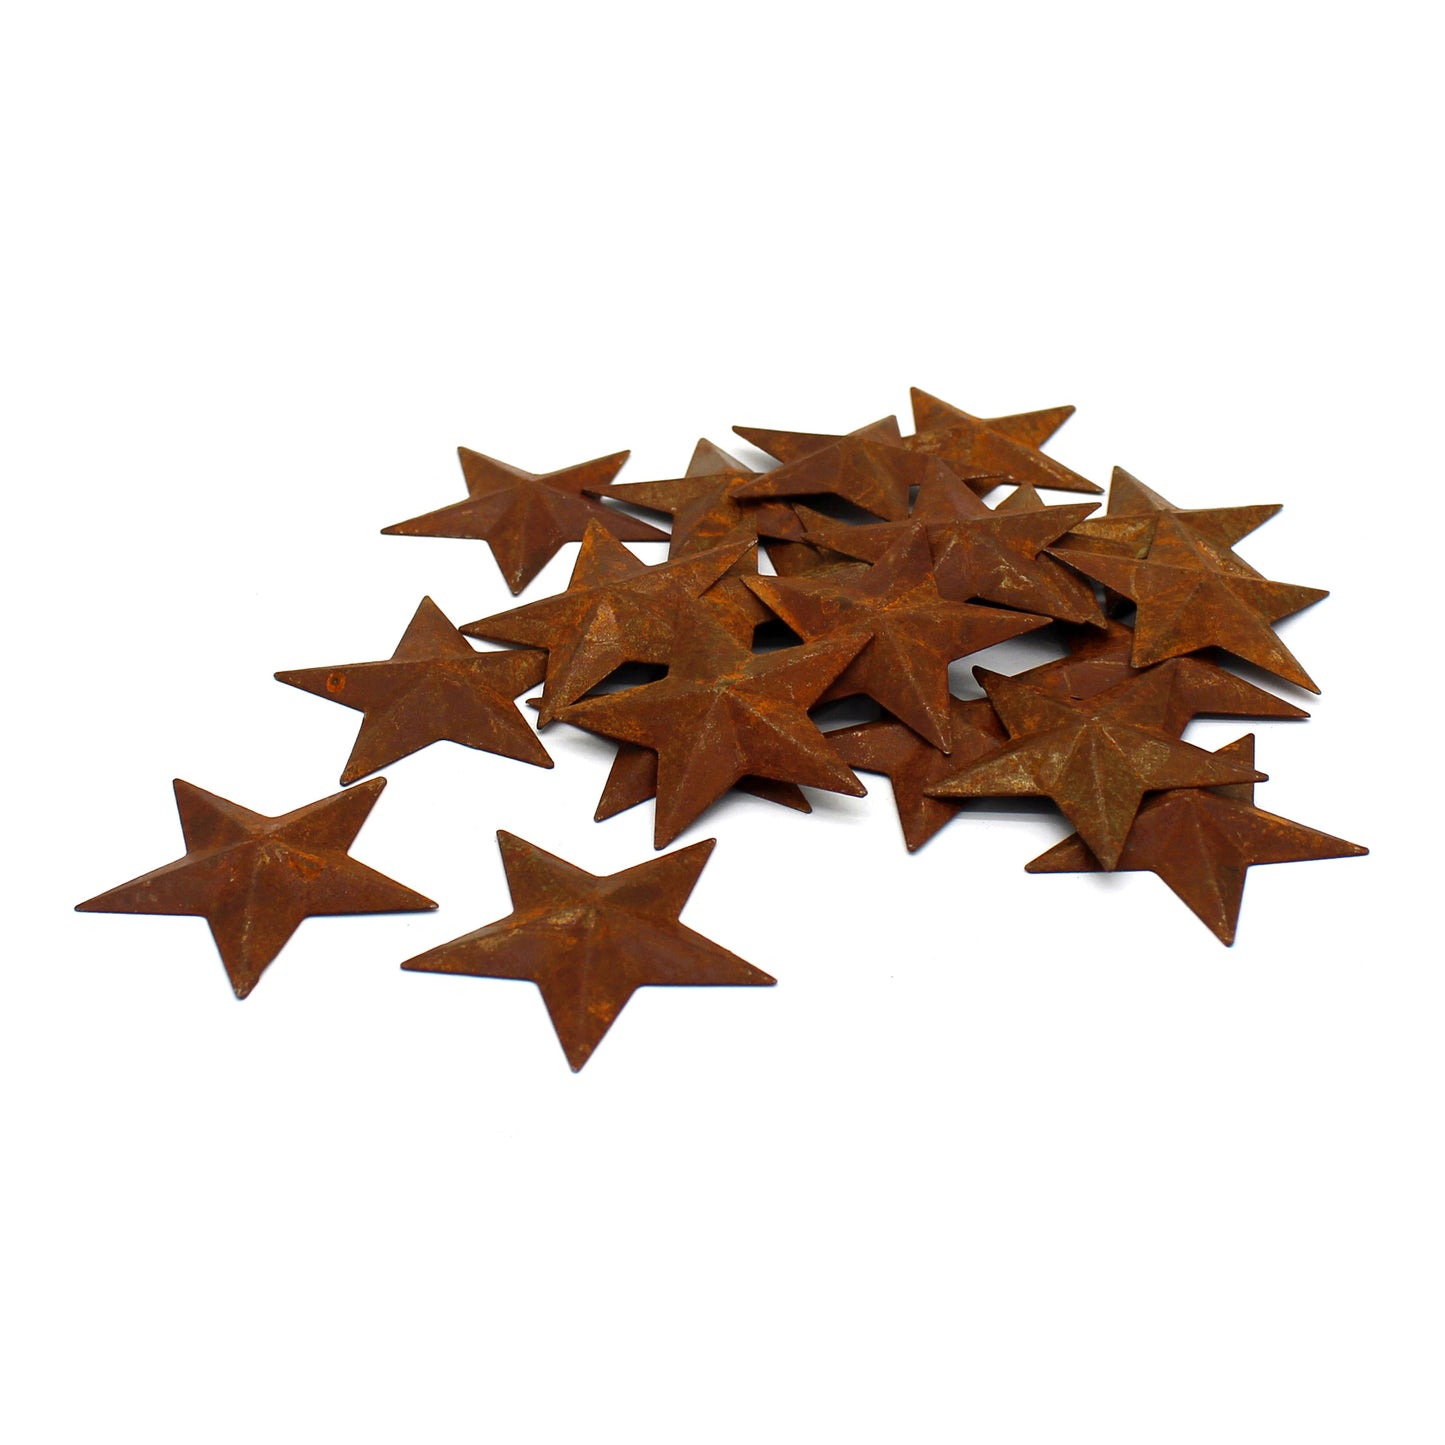 CVHOMEDECO. Primitives Rustic Country Décor. Rusty Small Metal Barn Star Home Decorative Accents, 2 Inch, Set of 24